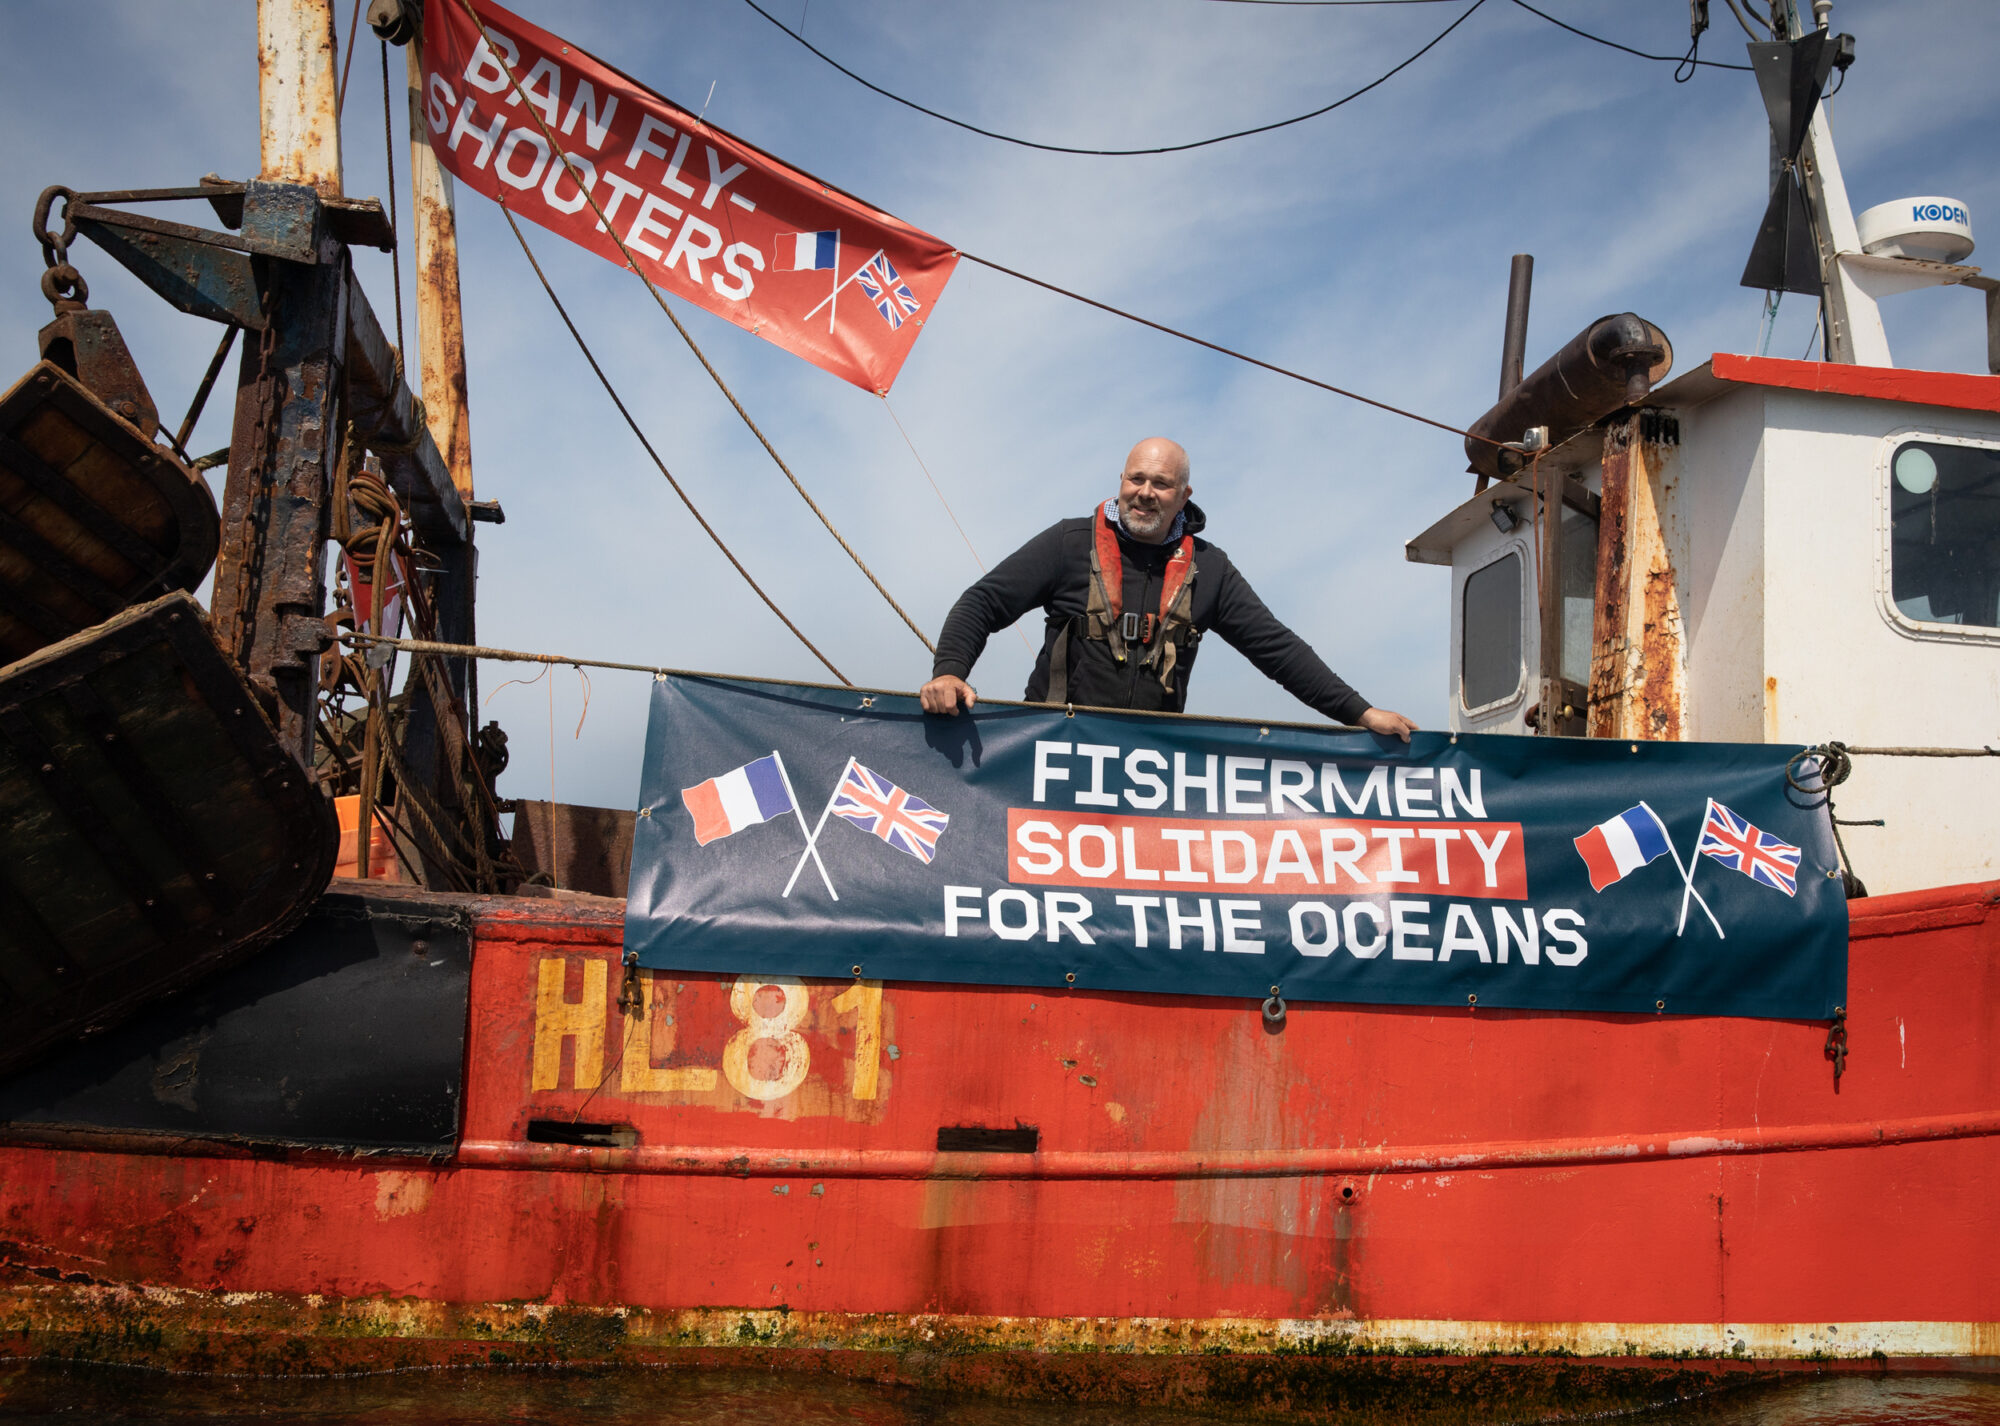 Fisherman stands on deck of a boat with a banner saying Fishermen solidarity for the oceans with crossed french and uk flags